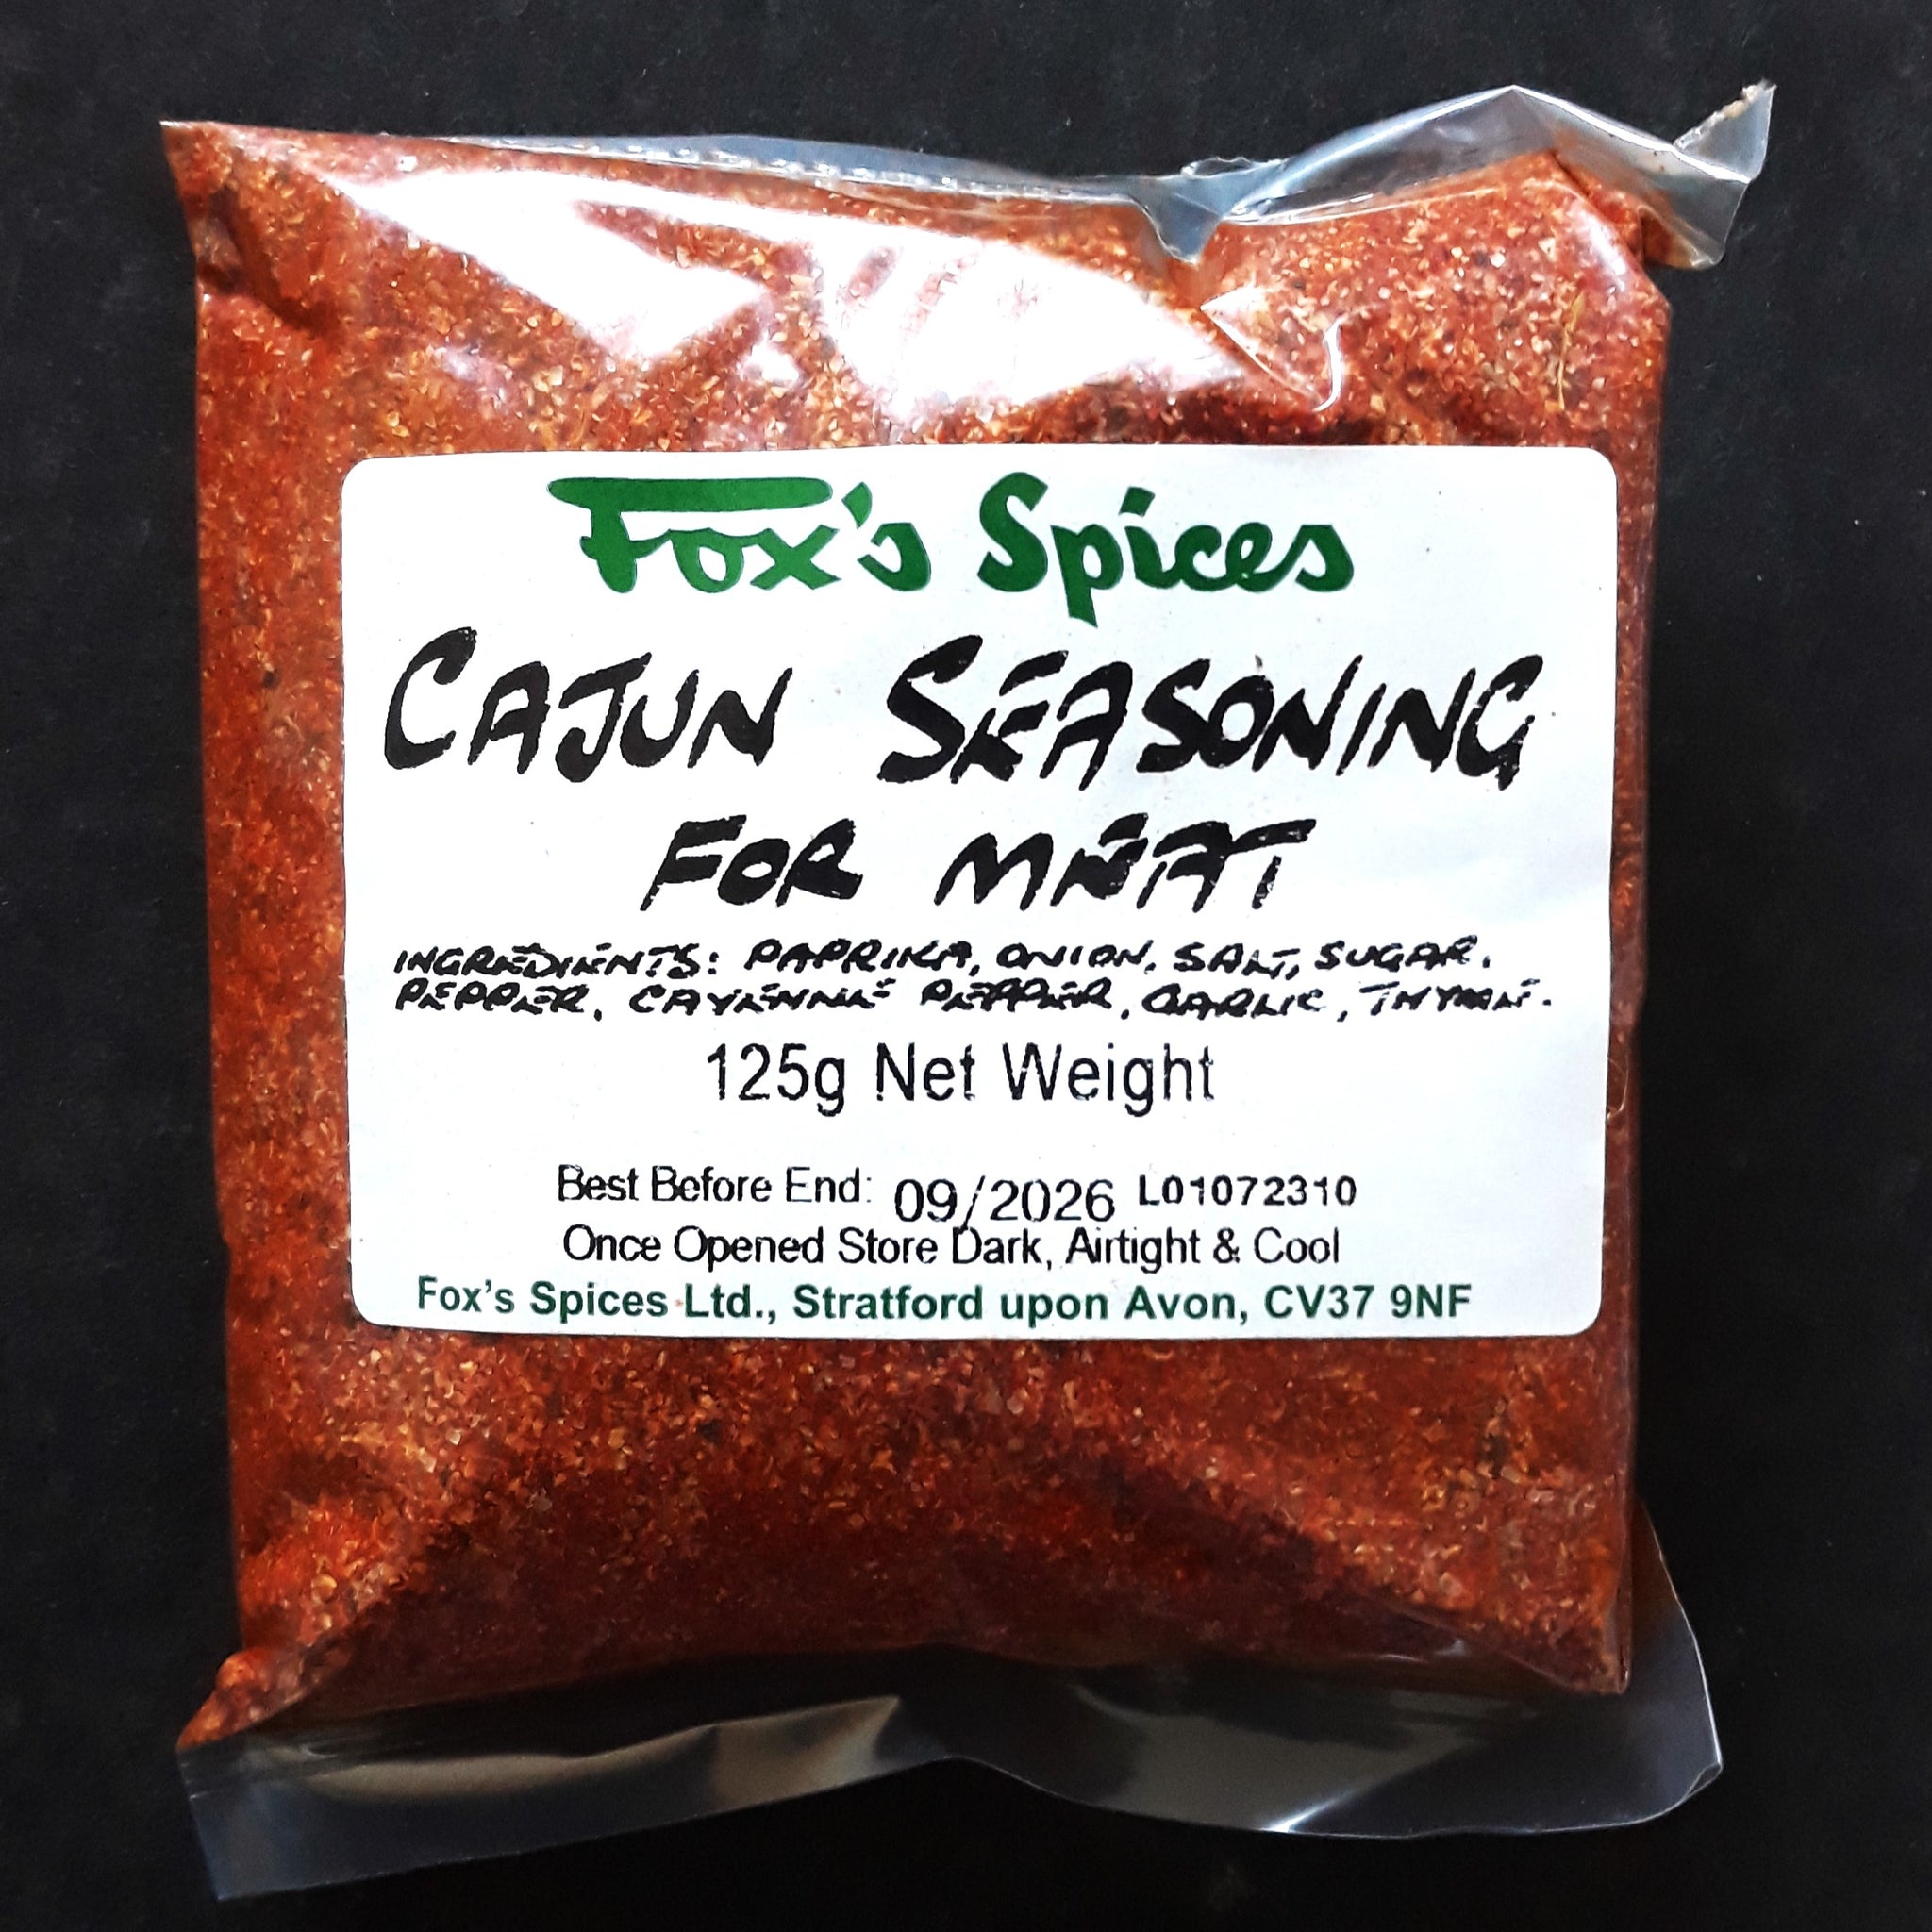 A 125g bag of Fox's Spices cajun seasoning for meat.